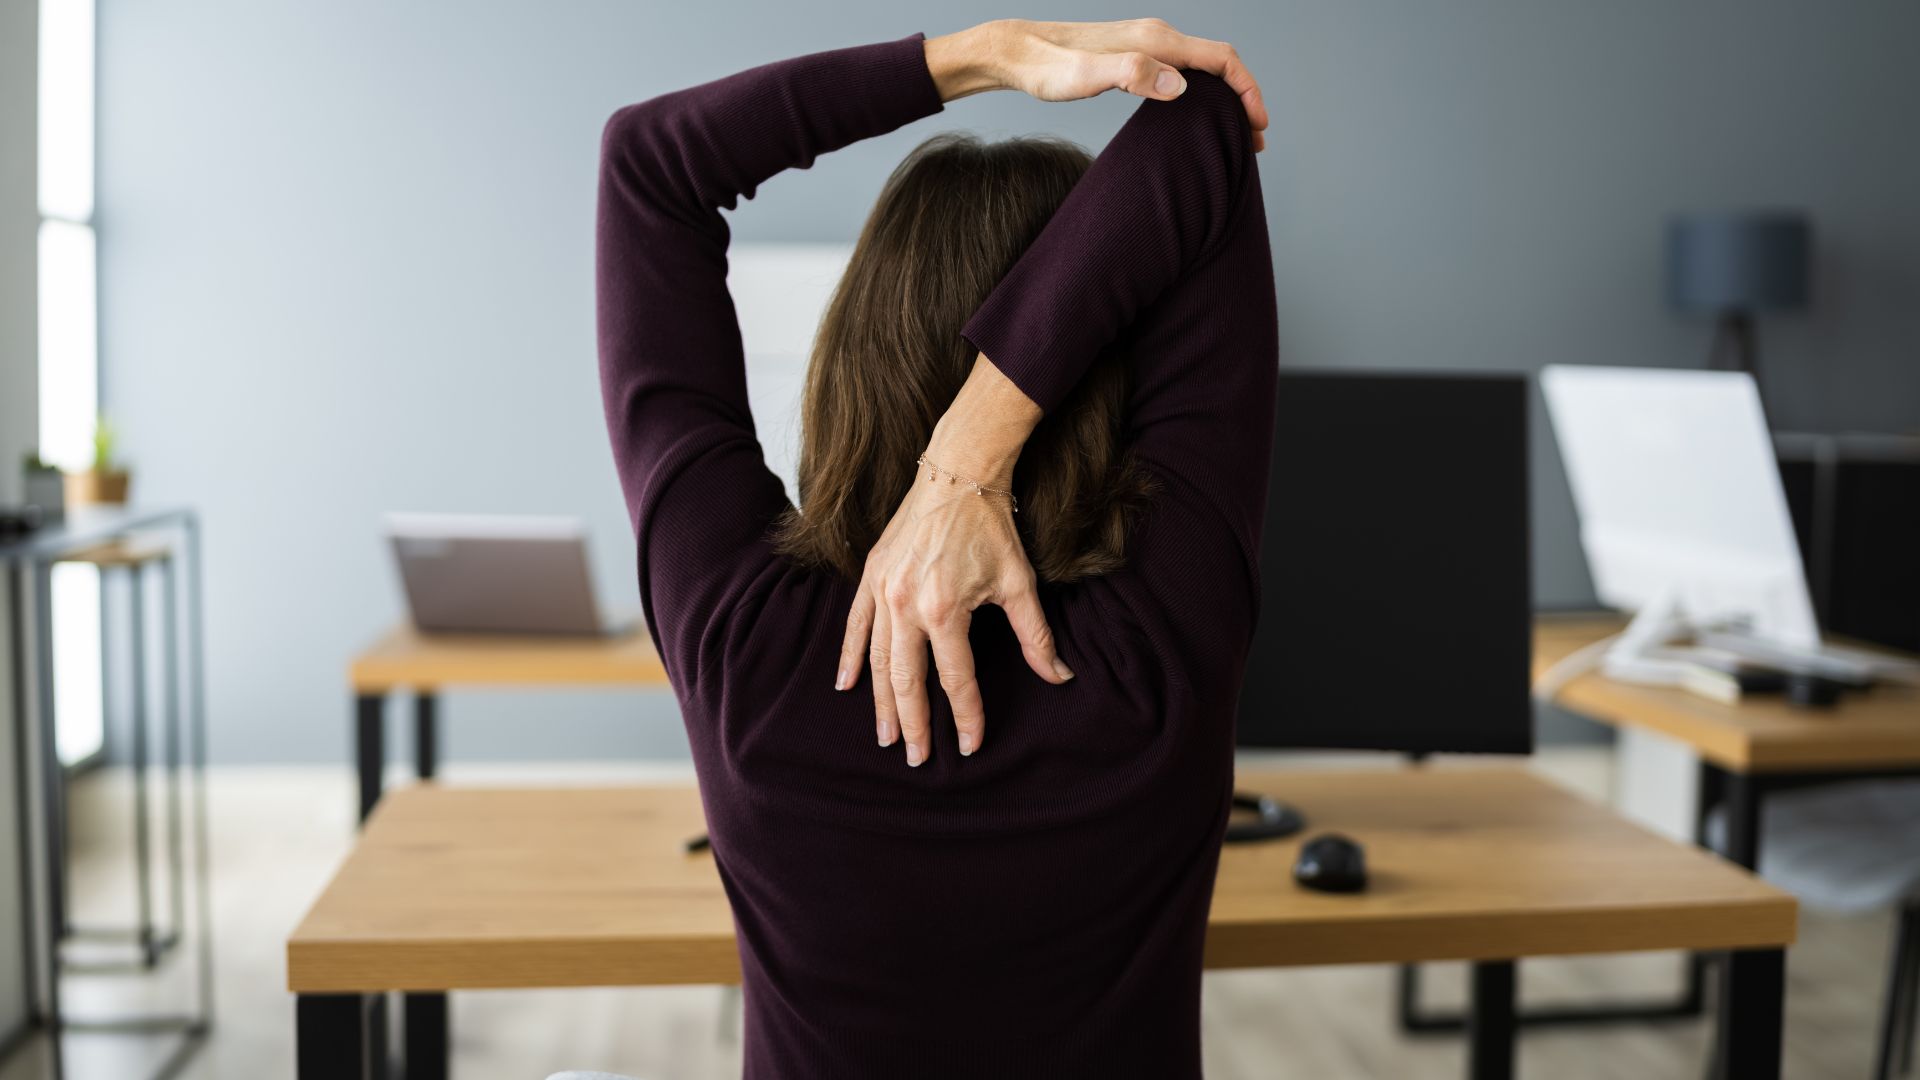 5 Simple But Effective Exercises You Can Do At Your Desk